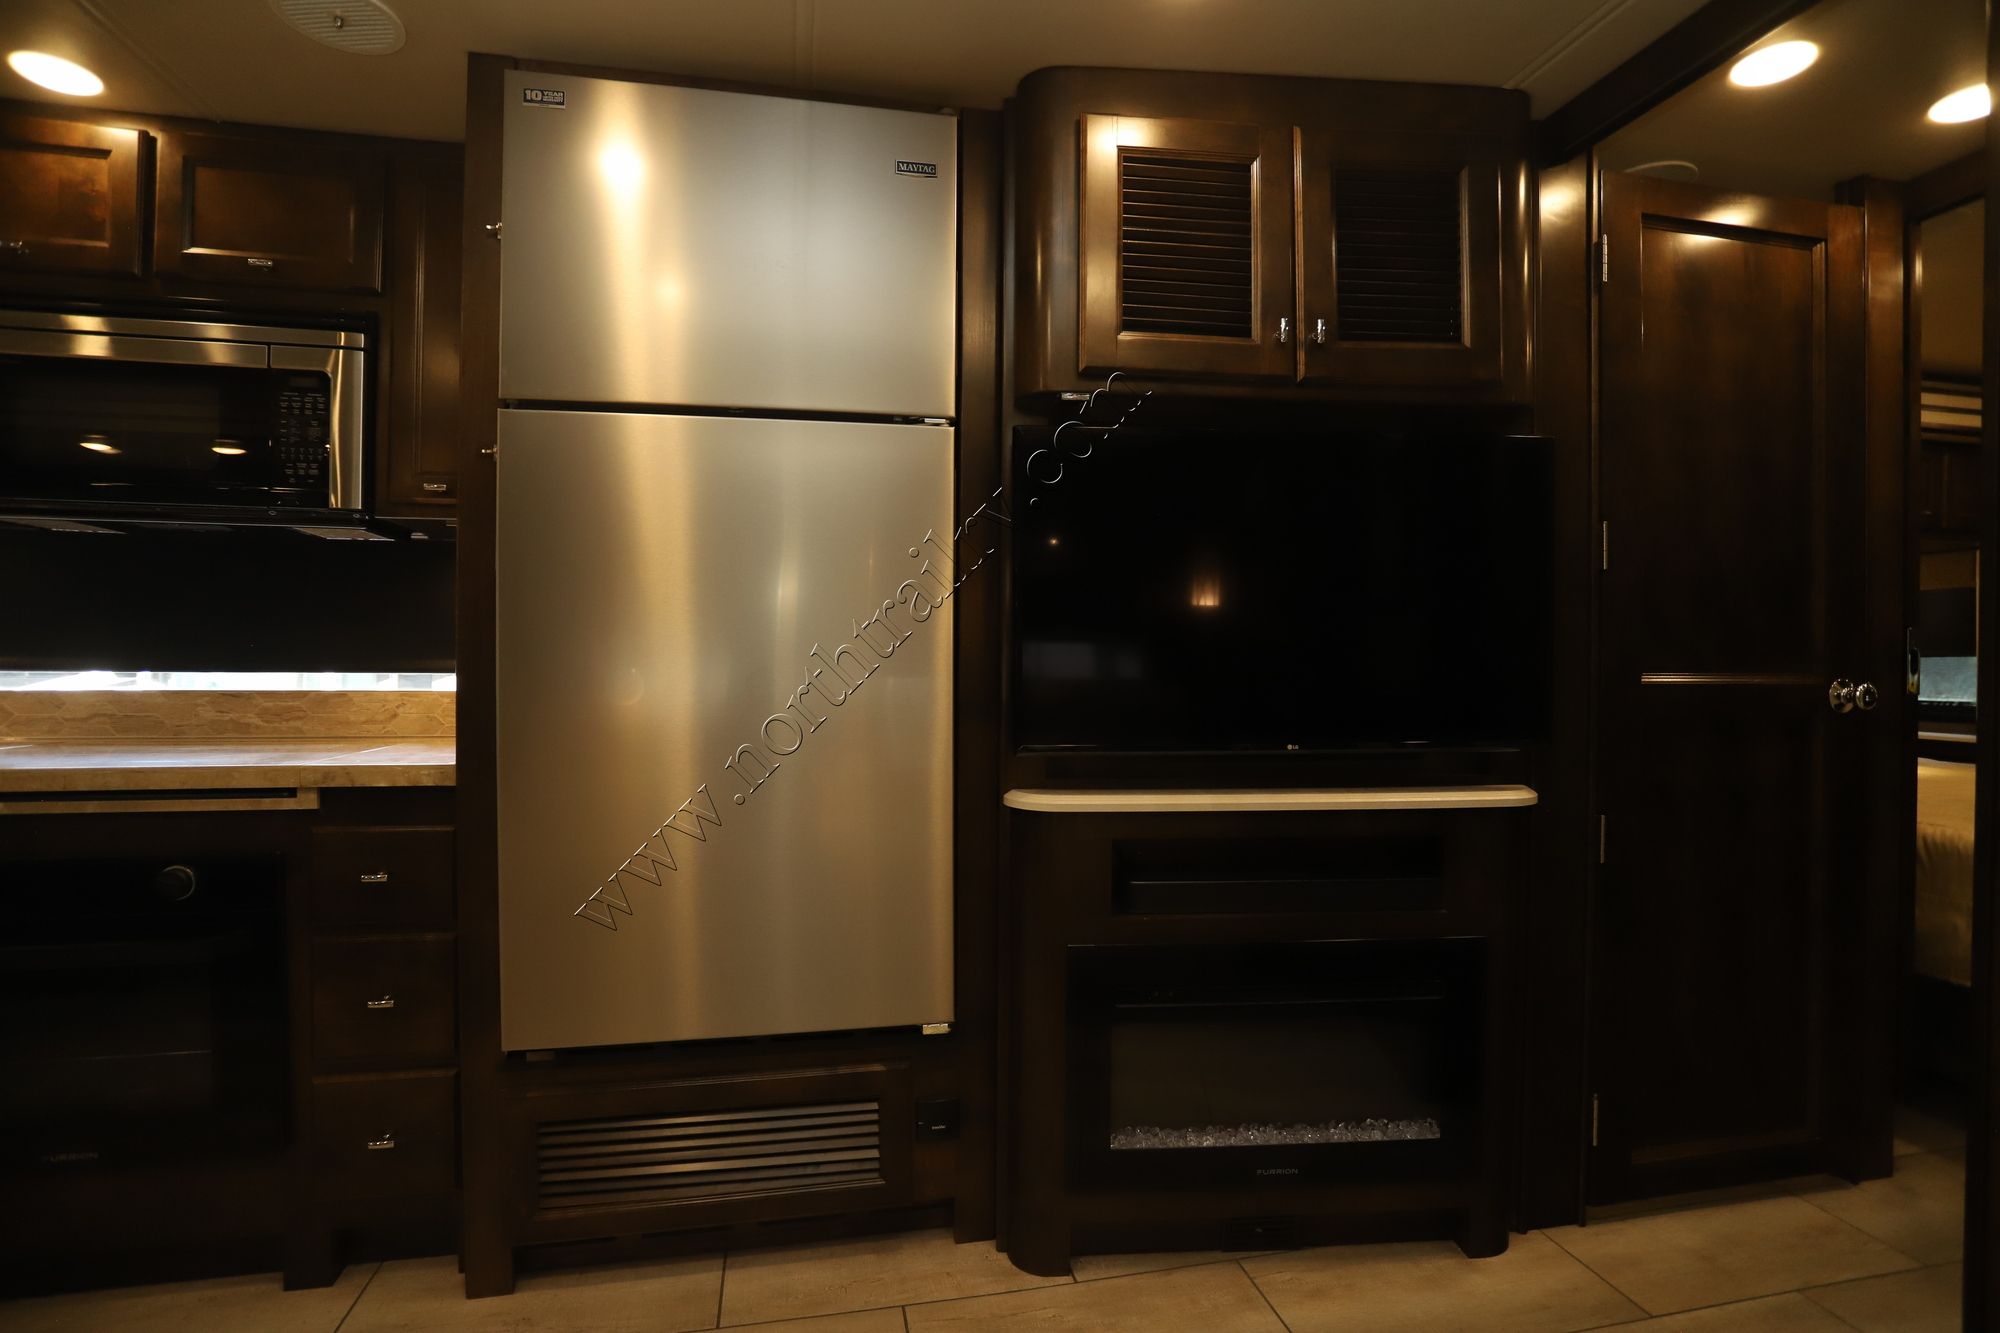 Used 2021 Tiffin Motor Homes Allegro 32SA Class A  For Sale